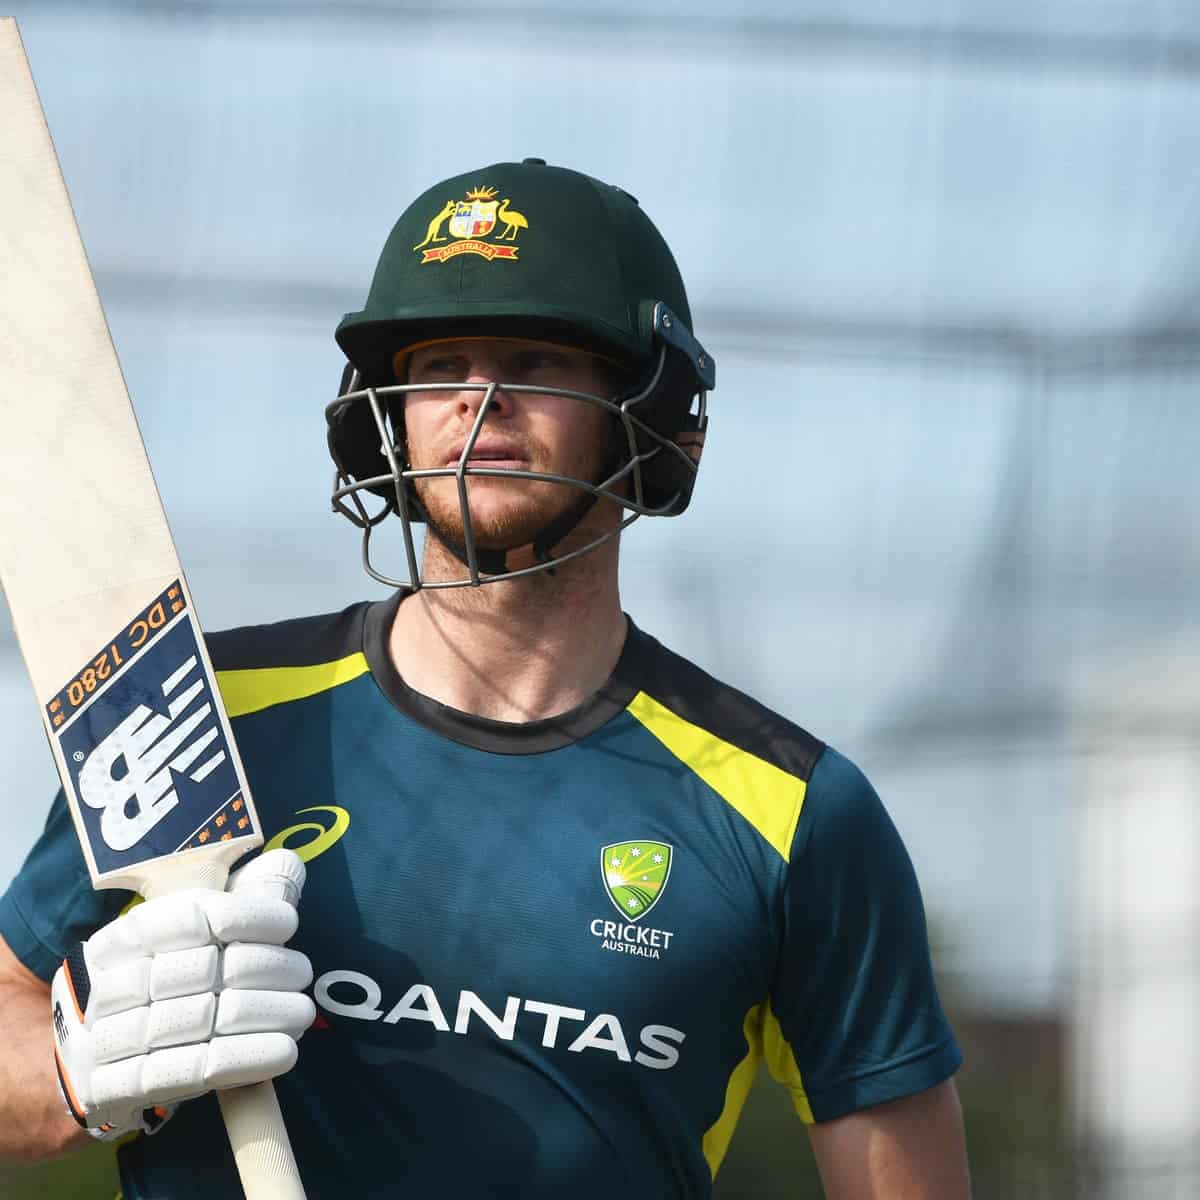 IND vs AUS: Steve Smith ‘Finds His Hands’ After Disappointing Performance in IPL